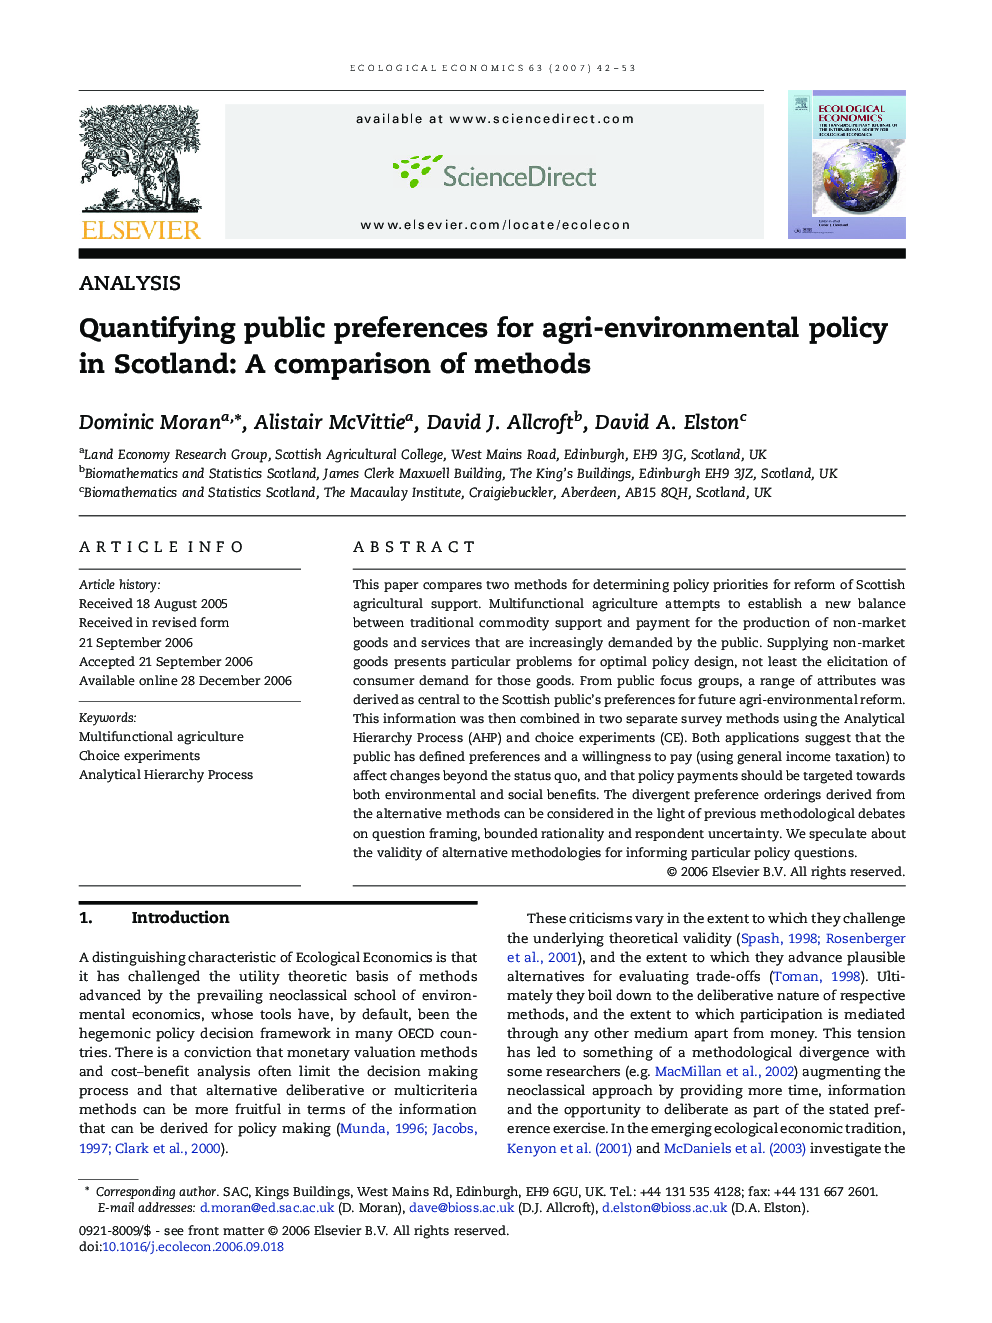 Quantifying public preferences for agri-environmental policy in Scotland: A comparison of methods